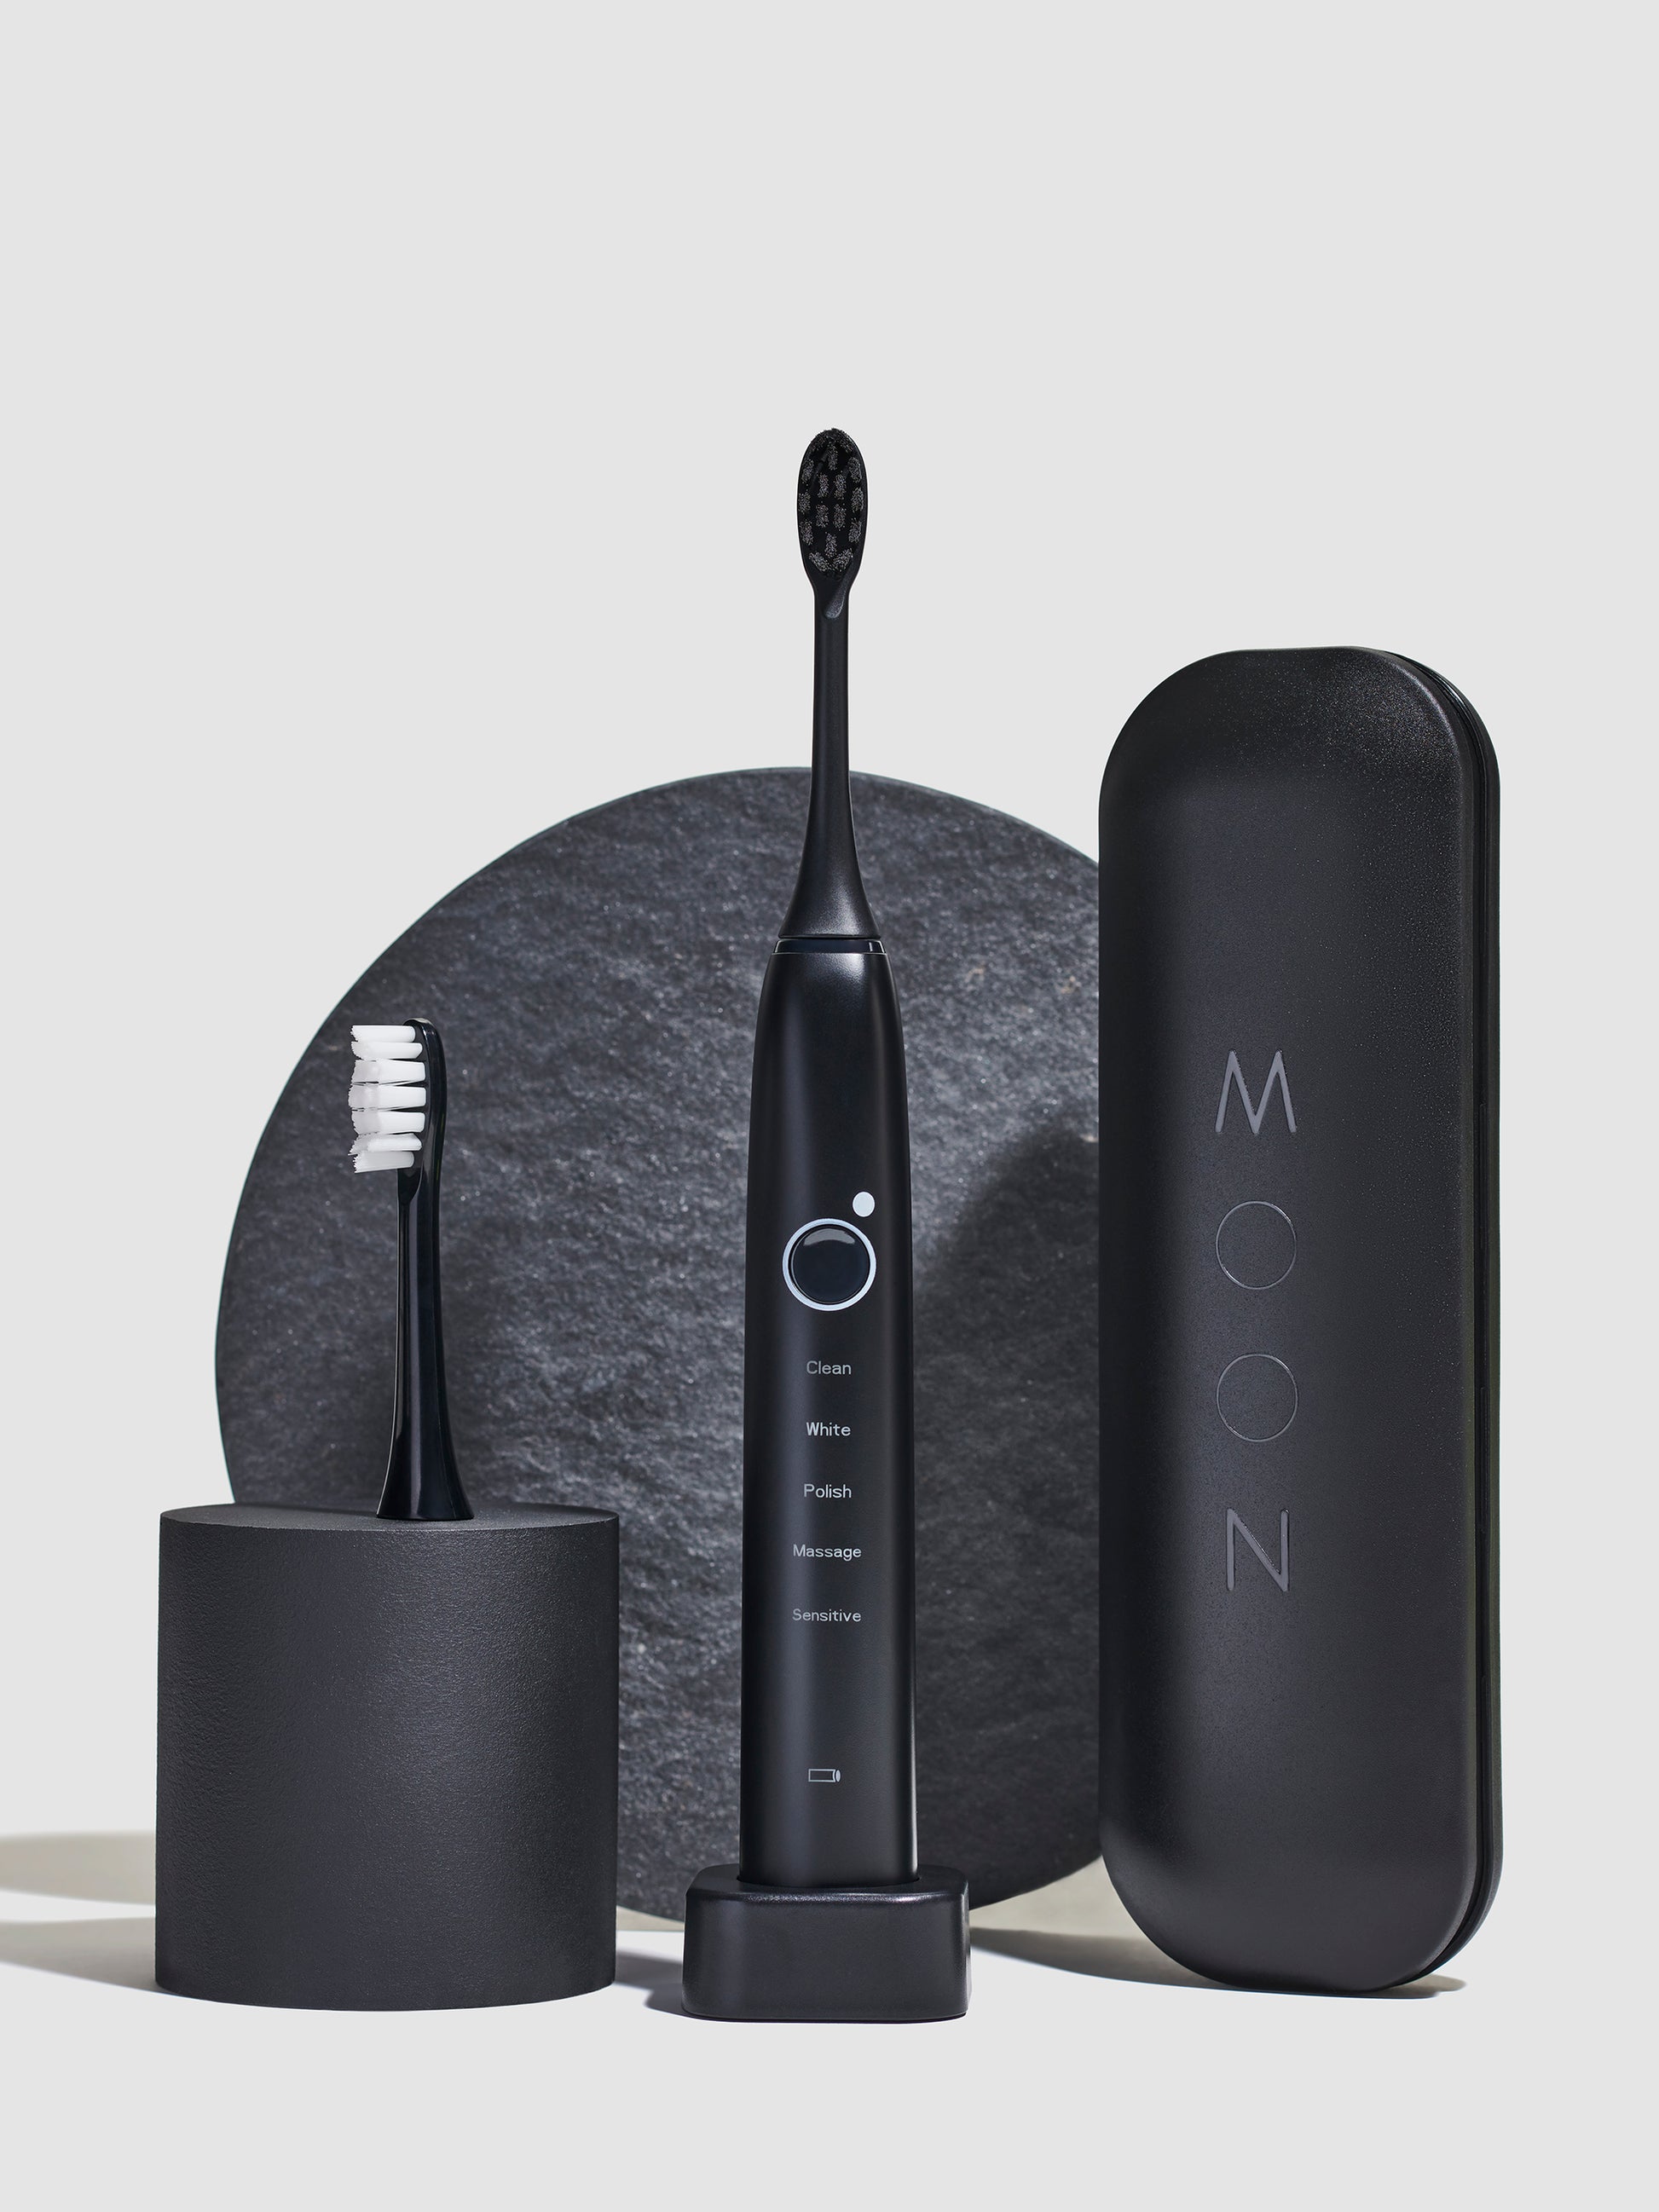 The Electric Toothbrush – Moon Oral Care